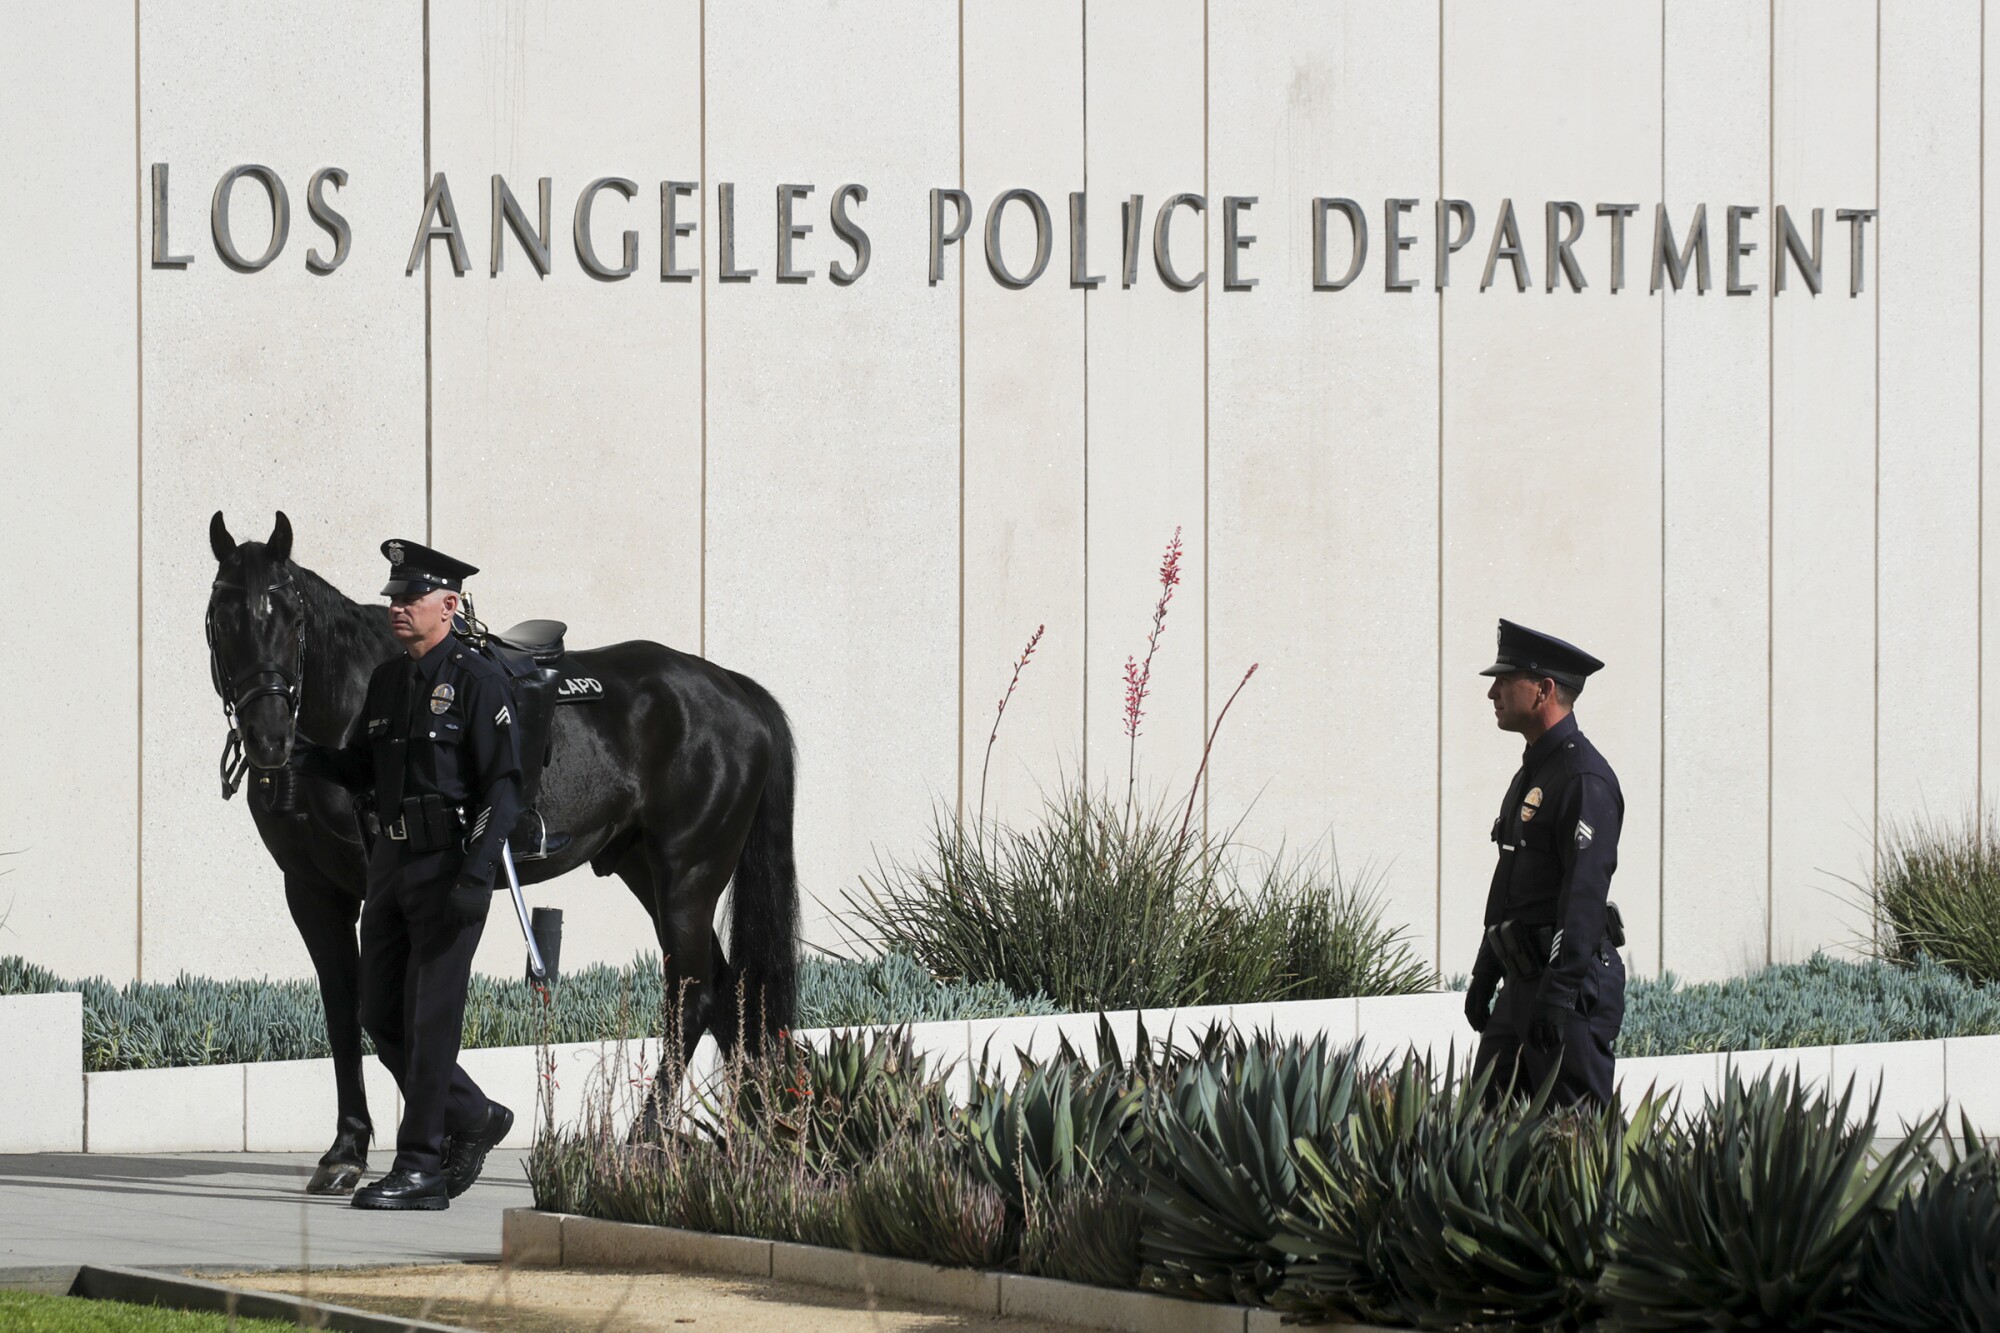 A LAPD riderless horse at a memorial ceremony to honor the 238 LAPD officers killed in the line of duty